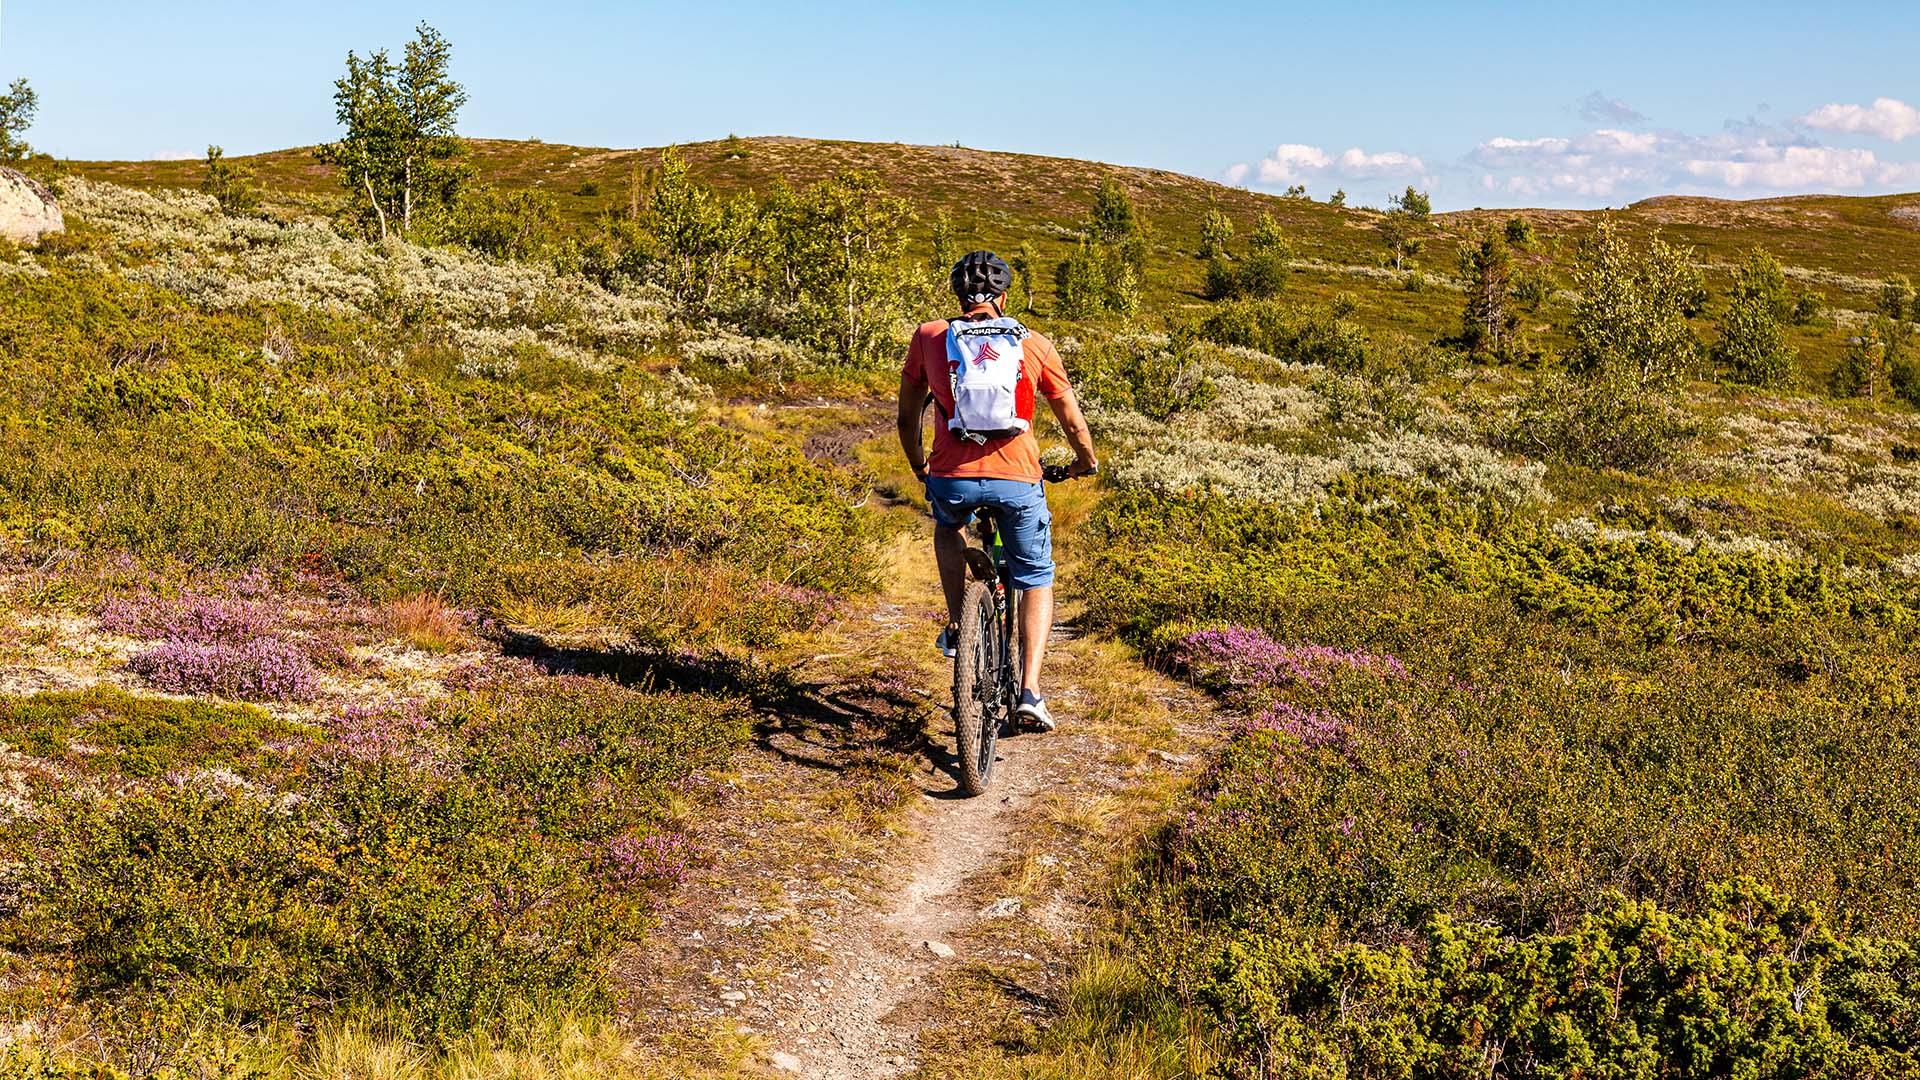 A cyclist on a single trail through blooming heather in high country terrain.